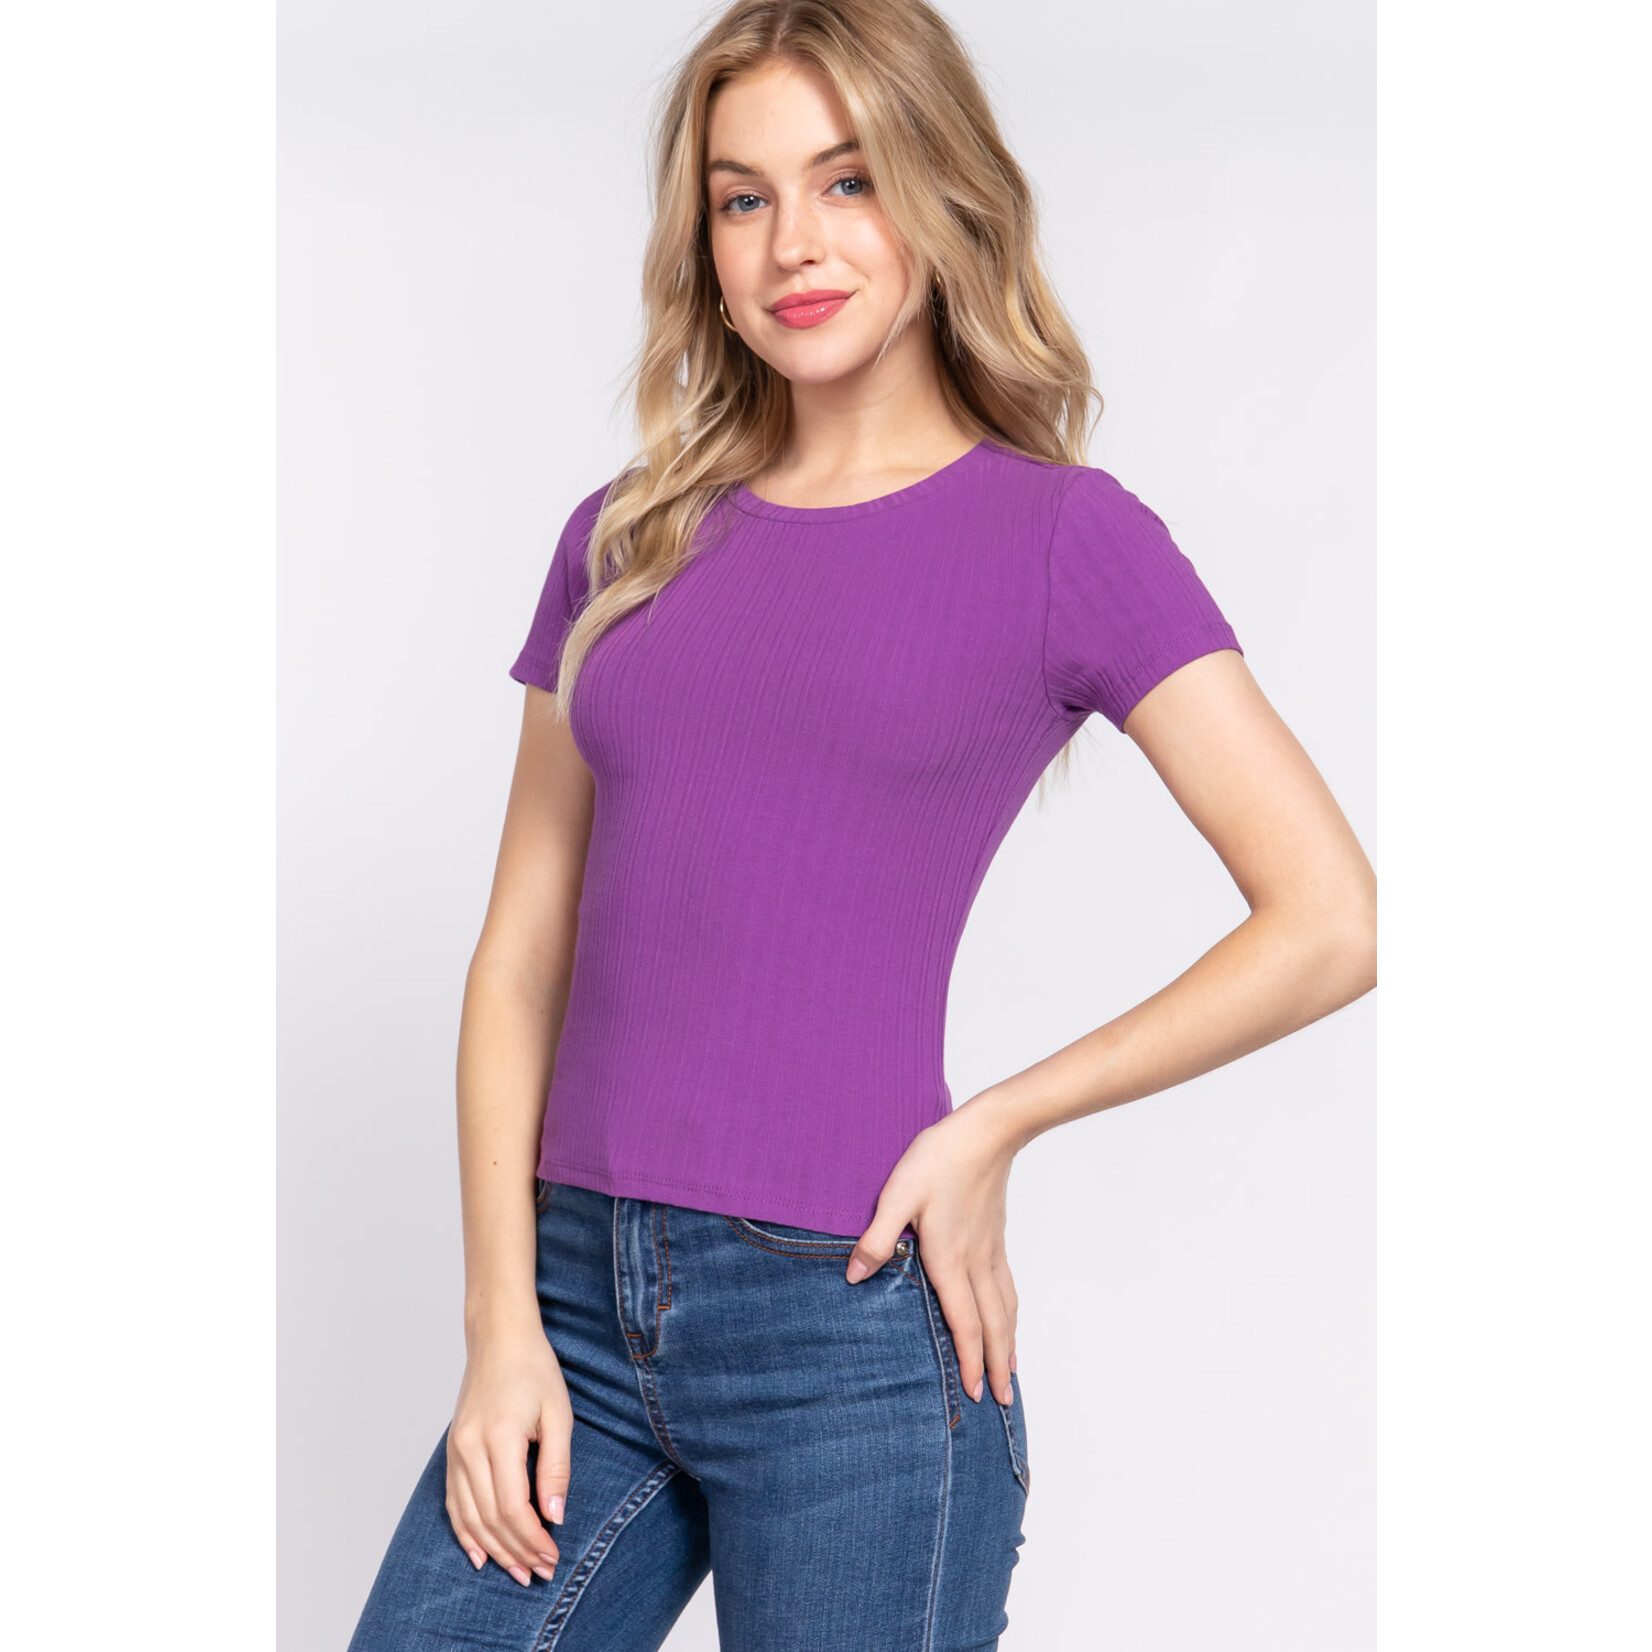 ACTIVE USA, INC. Active USA - Short Slv Crew Neck Variegated Knit Top - T13600